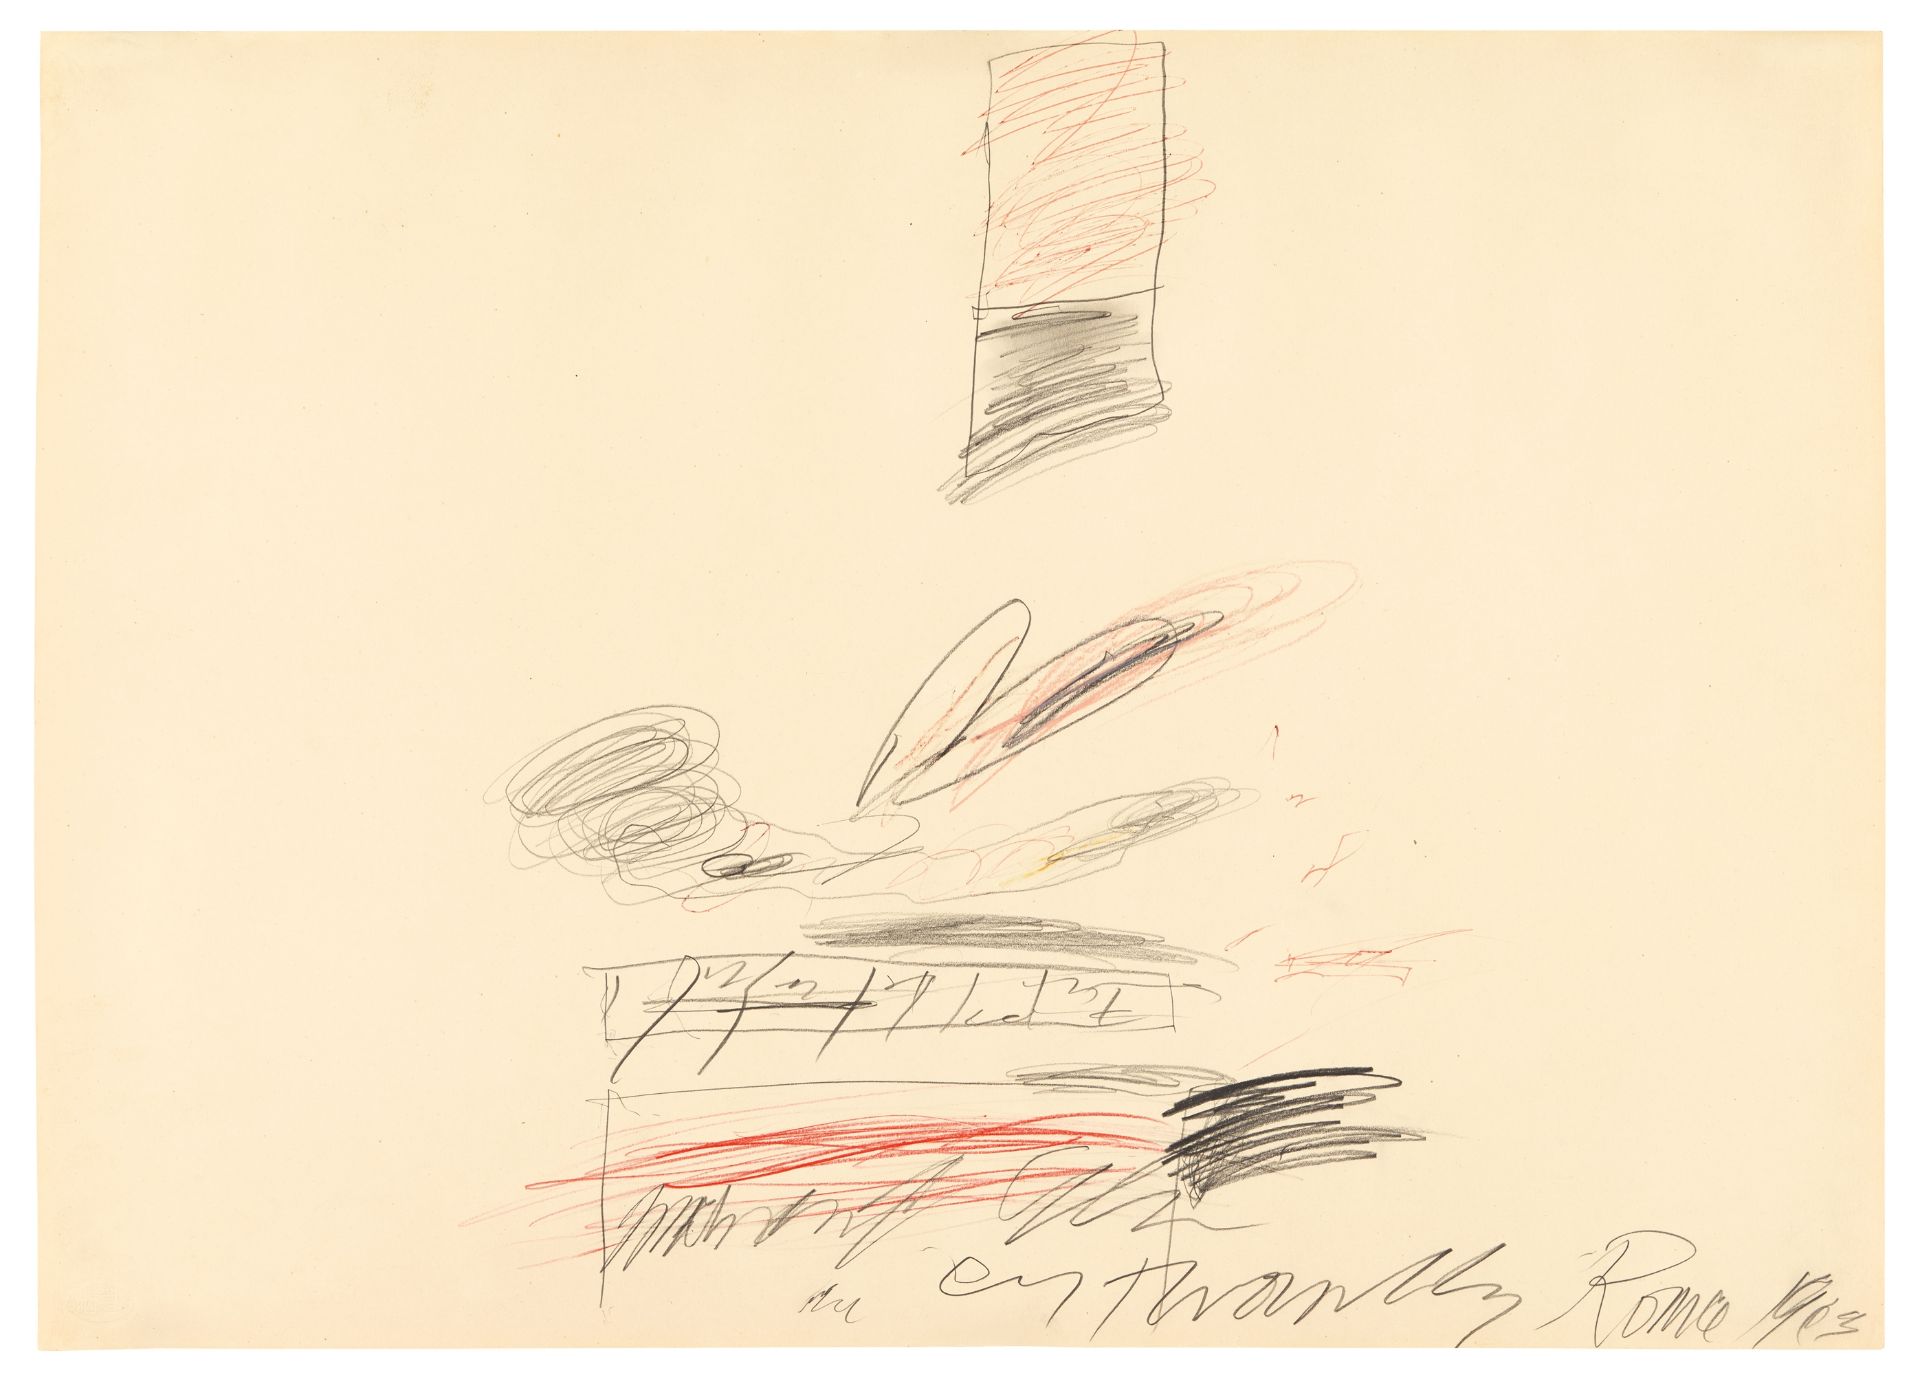 Cy Twombly, Untitled